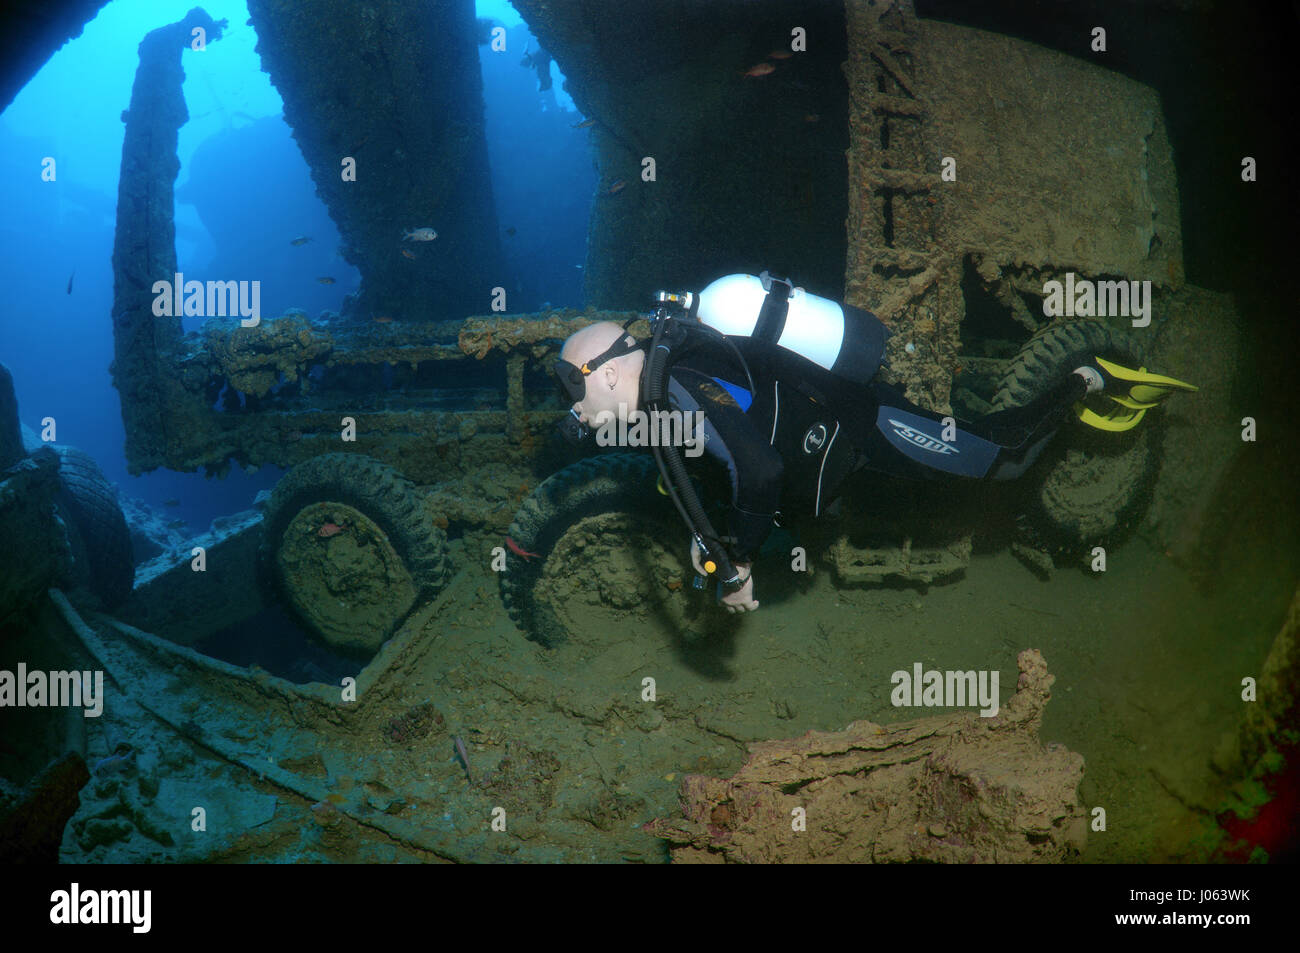 A diver swimming over to a truck. EERIE underwater pictures show inside the wreckage of the sunken British World War Two ship SS Thistlegorm on the seventy-fifth anniversary of her sinking. The series of images show the rusted remains of the merchant navy ship’s cargo which includes motorbikes, army trucks and an aircraft propeller. Other pictures show how sea life have been inhabiting the wreckage. Stock Photo